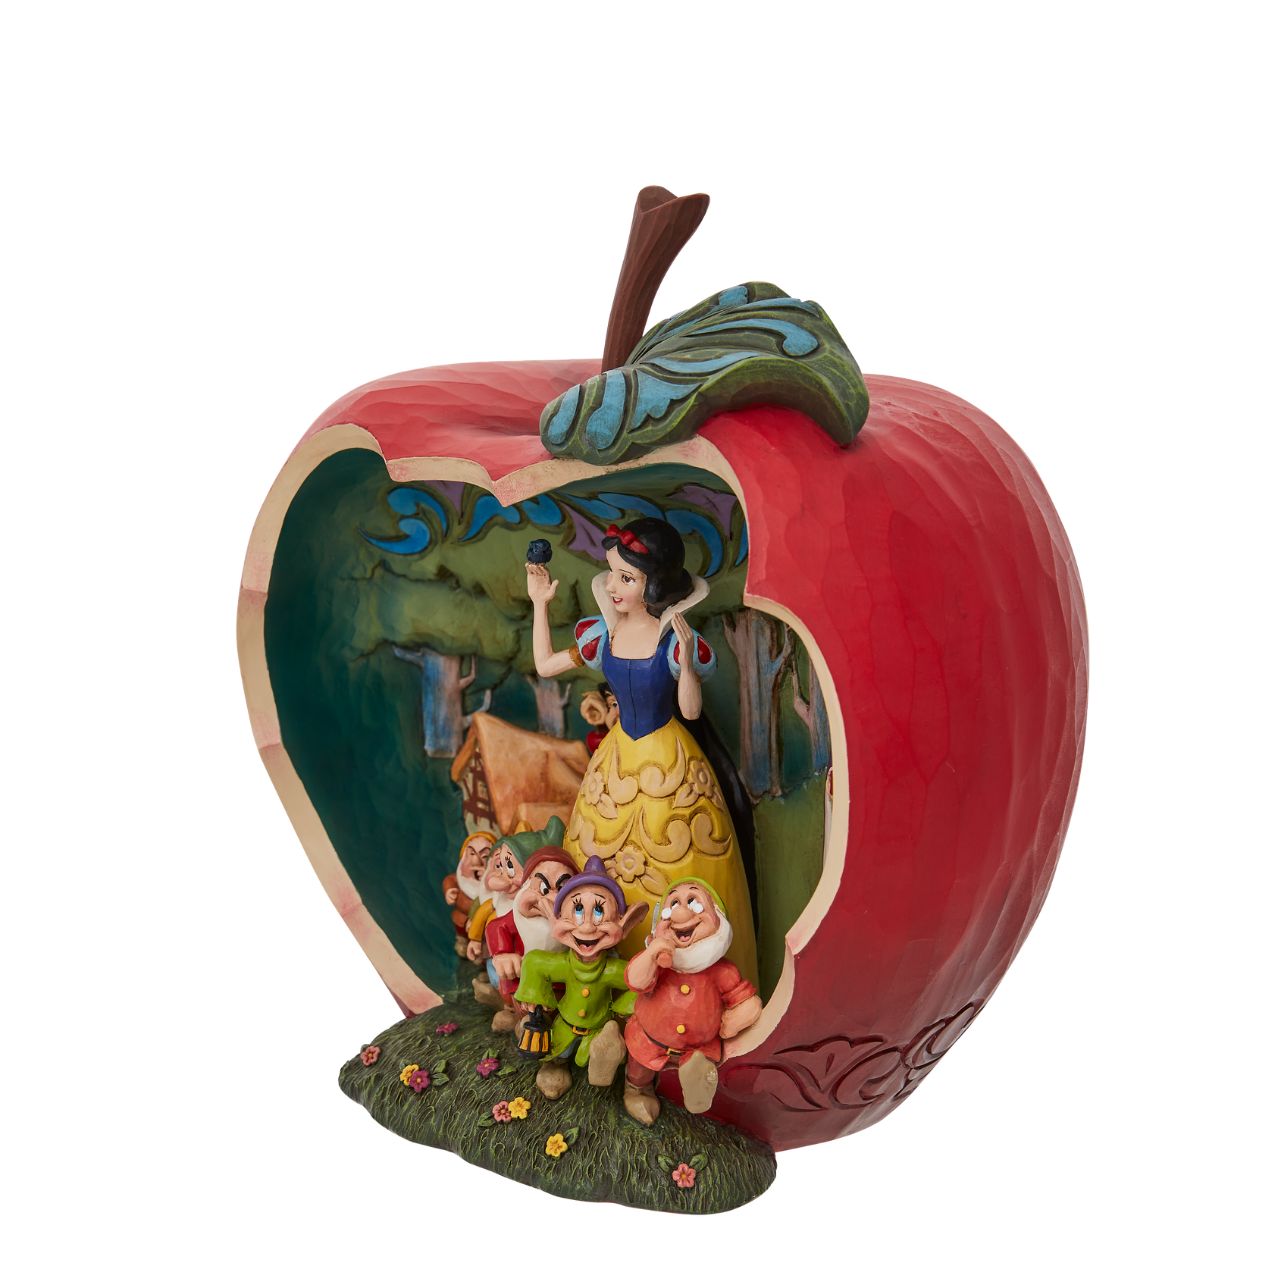 Framed within a halved apple, this bewitching forest scene gathers all the characters of the 1937 Disney classic, Snow White. Snow White smiles alongside the seven dwarfs unaware of the dangers surrounding her while the Evil Queen plots with poison in this spectacular masterpiece.